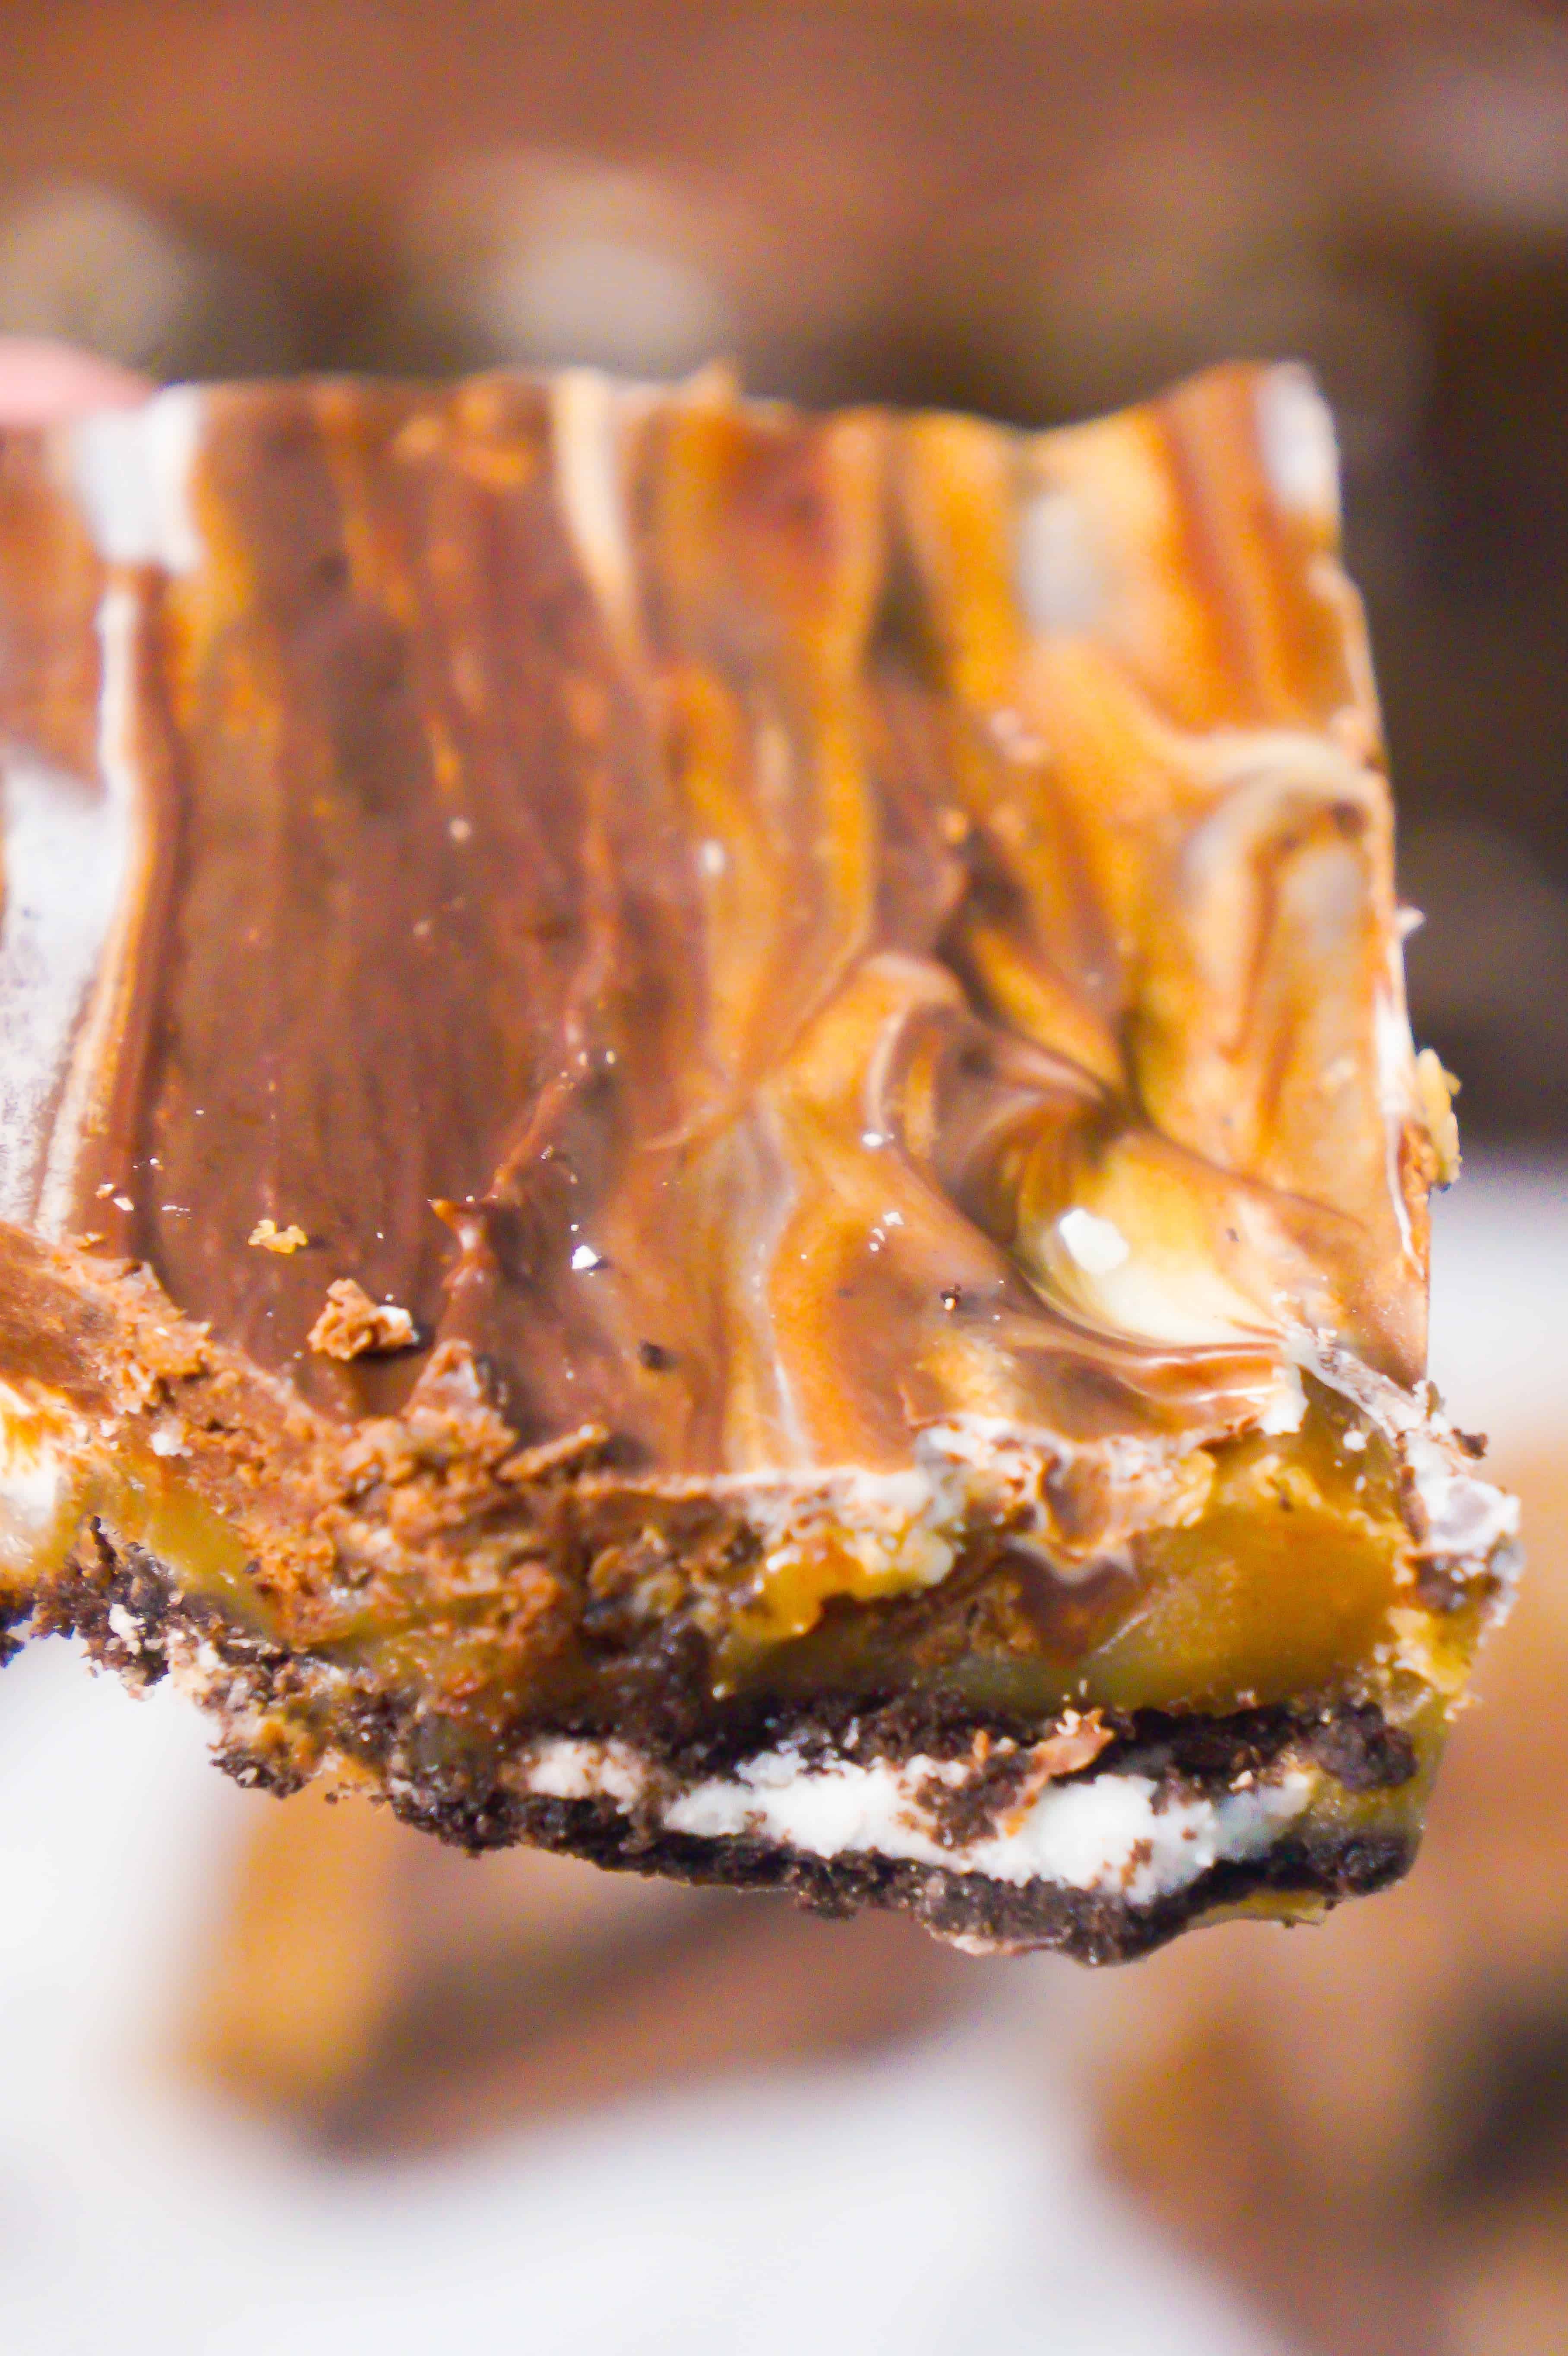 Chocolate Caramel Oreo Bars are an easy Christmas dessert recipe perfect for holiday parties.